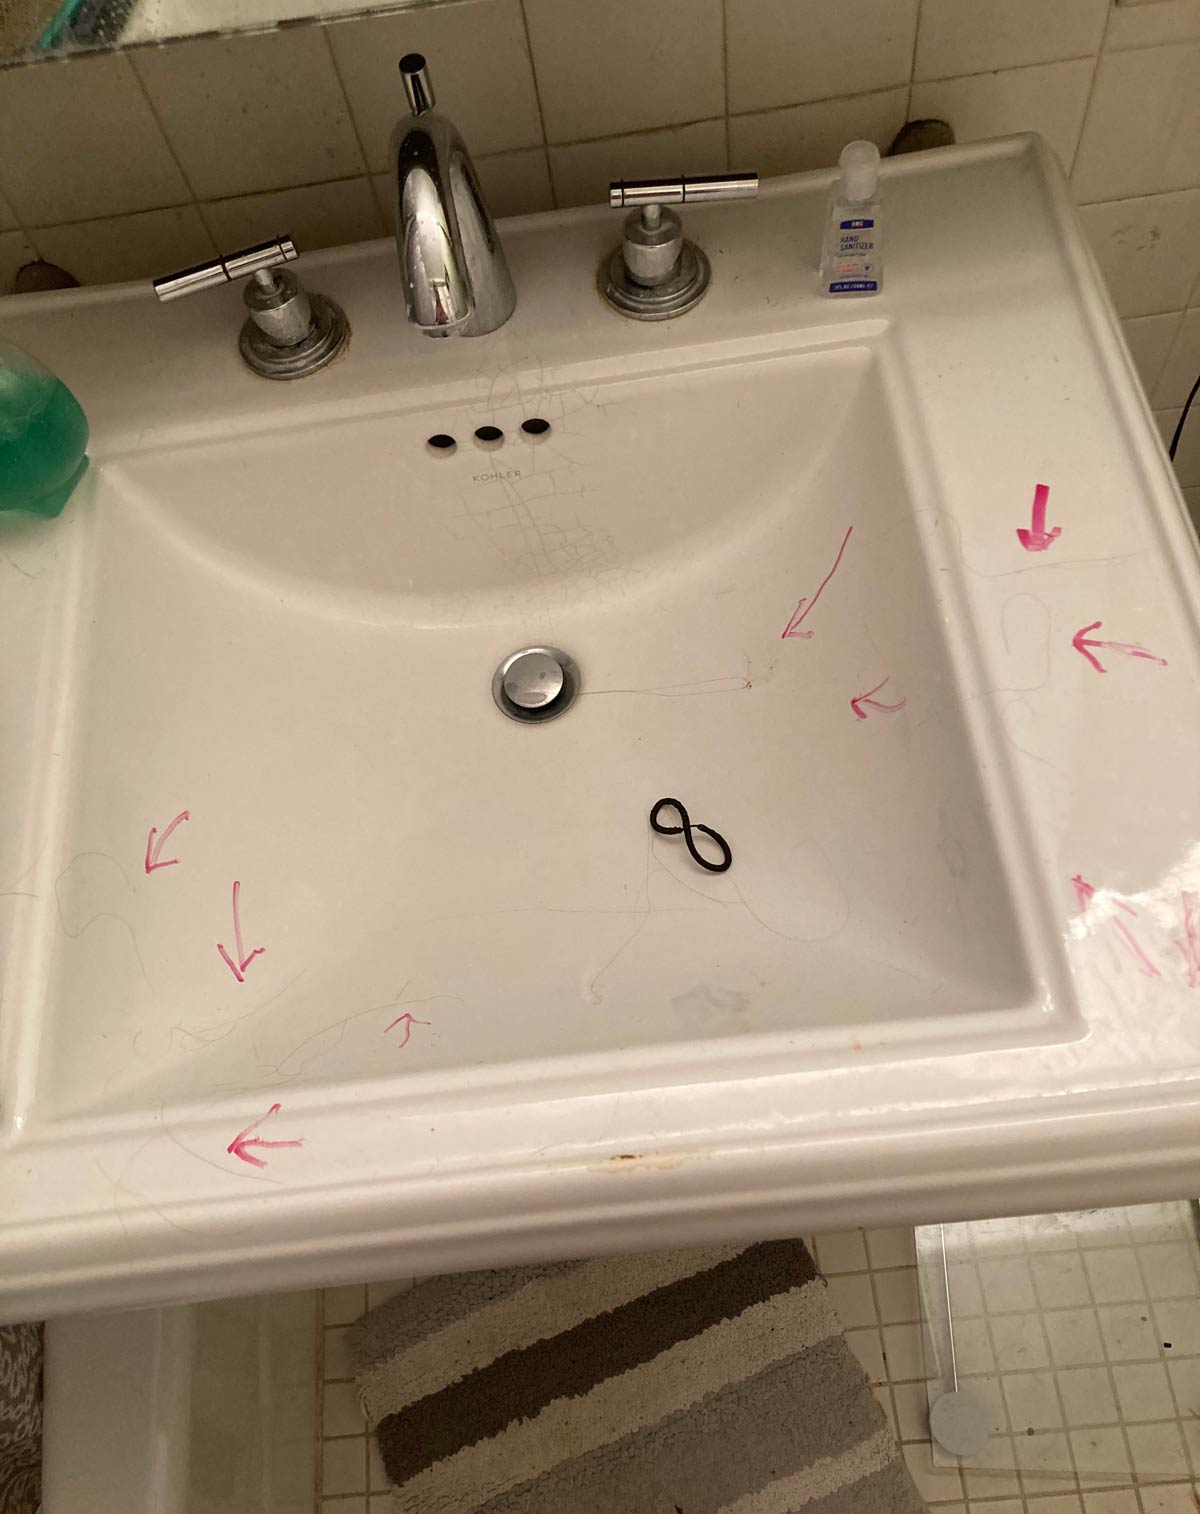 I moved in with my dad a little over a month ago. He asked me to clean my hair from the bathroom sink. I told him I didn’t know what he was talking about. This evening I came home to this